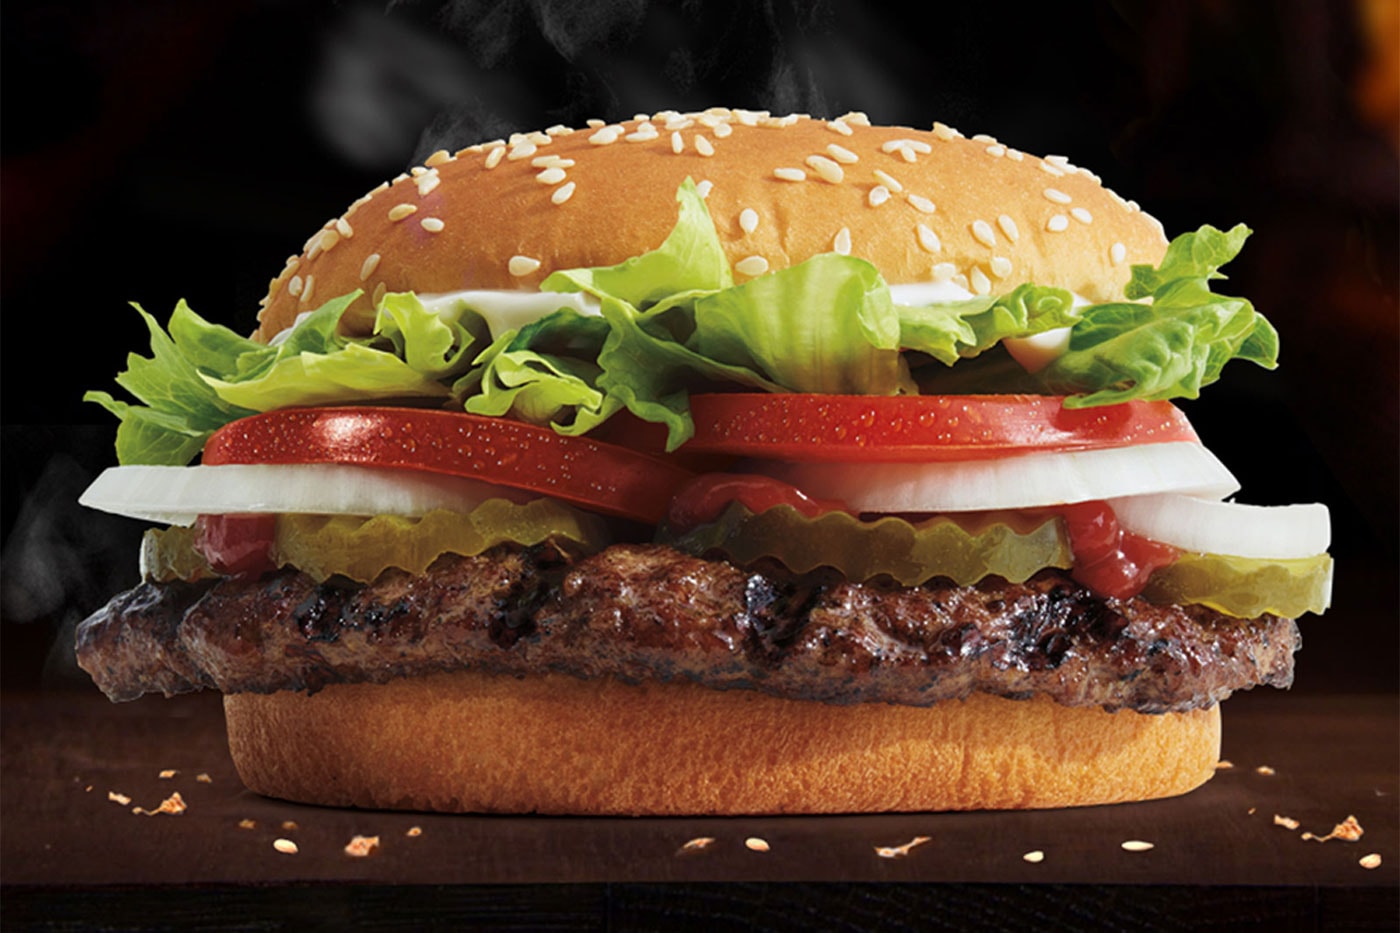 Customer Sues Burger King for Claiming Whopper Is Smaller Than Advertised fast food f&b bacon double cheeseburger inflation 